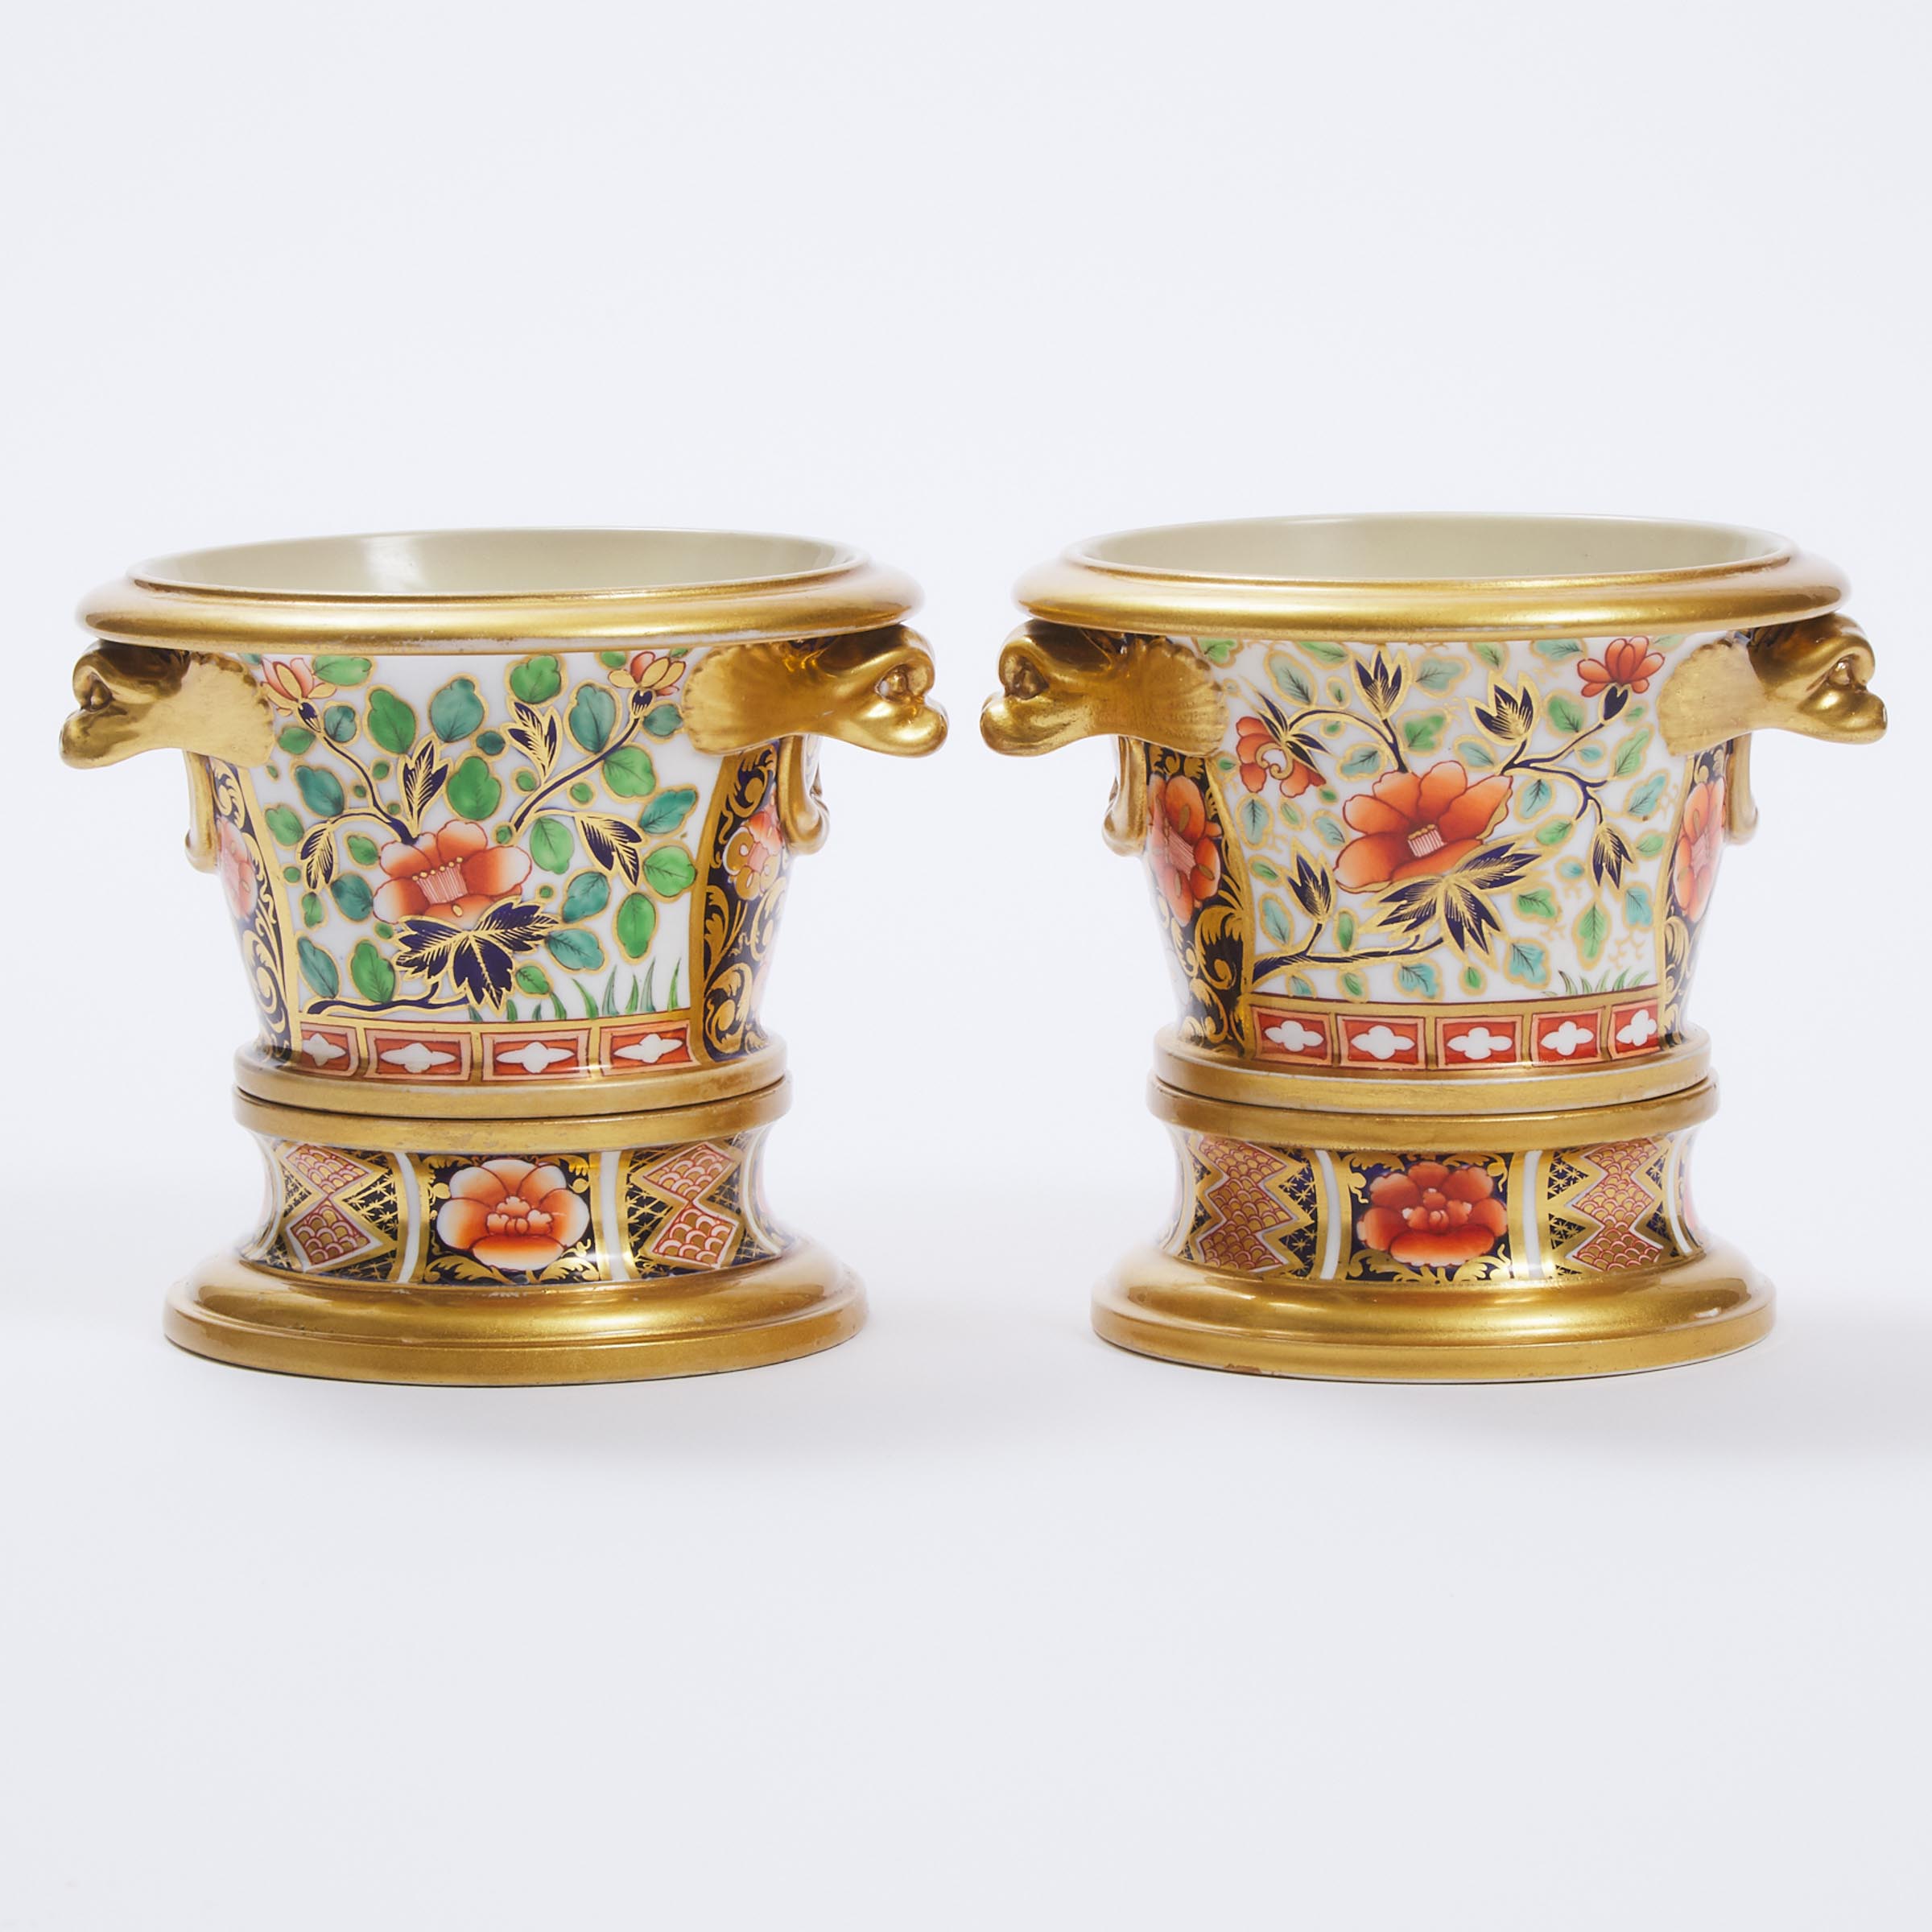 Pair of Spode Japan Pattern Small Cachepots and Stands, c.1820